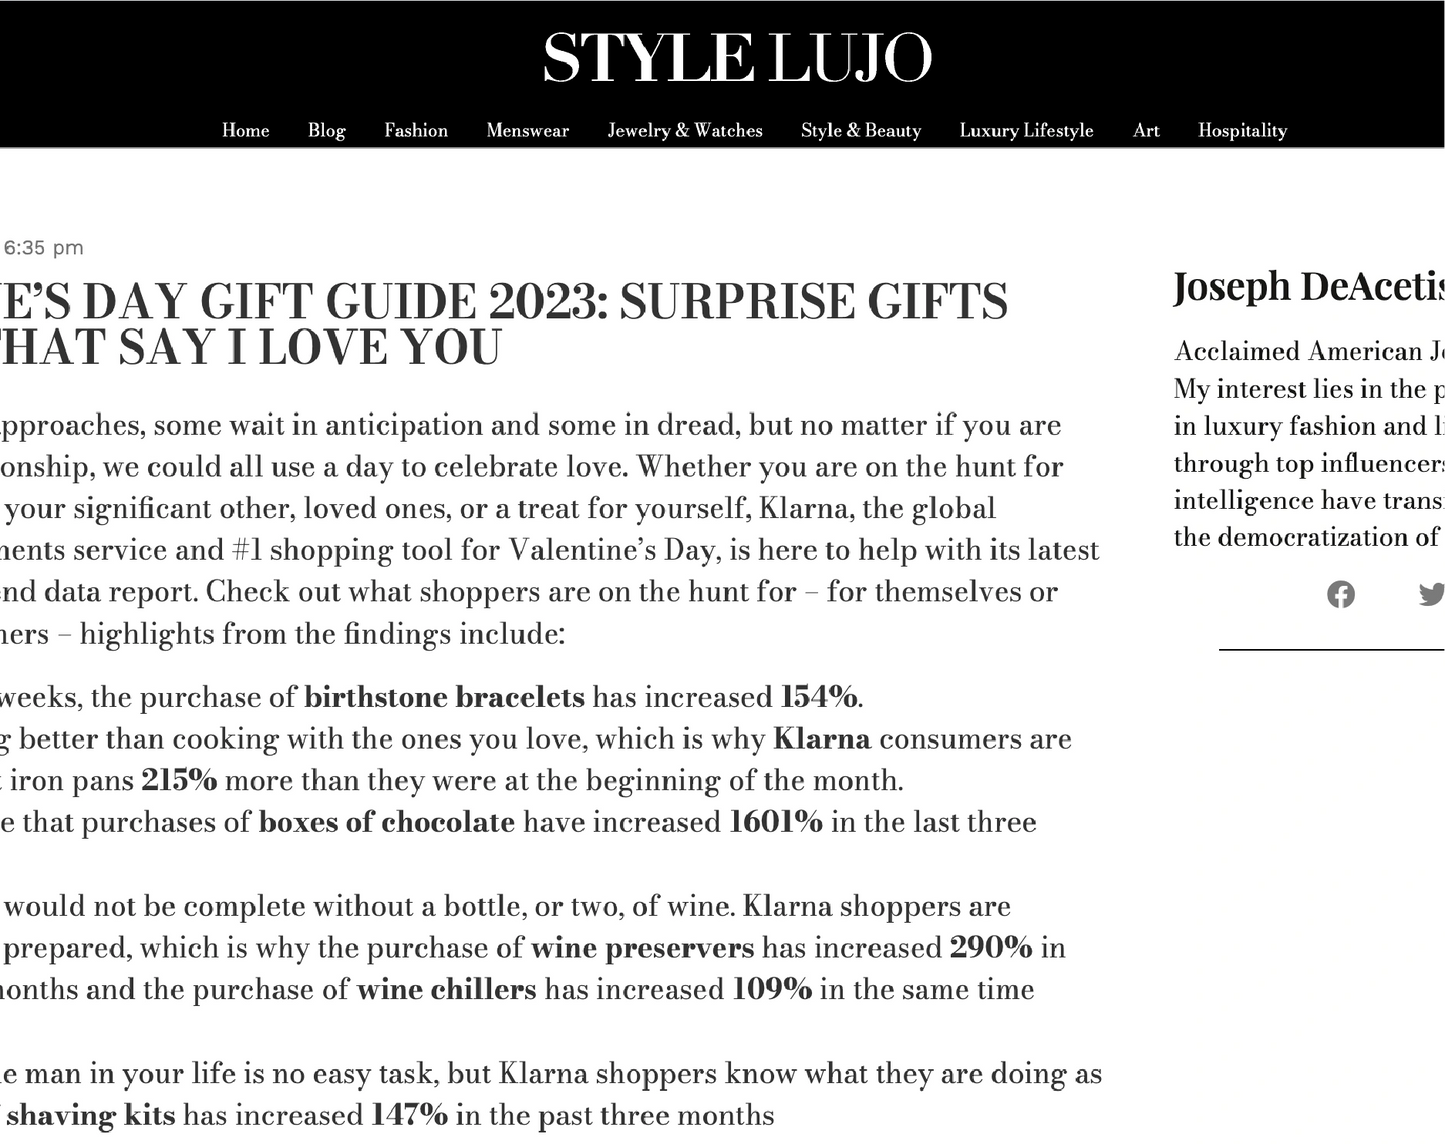 Veriphy Skincare featured in Style Lujo